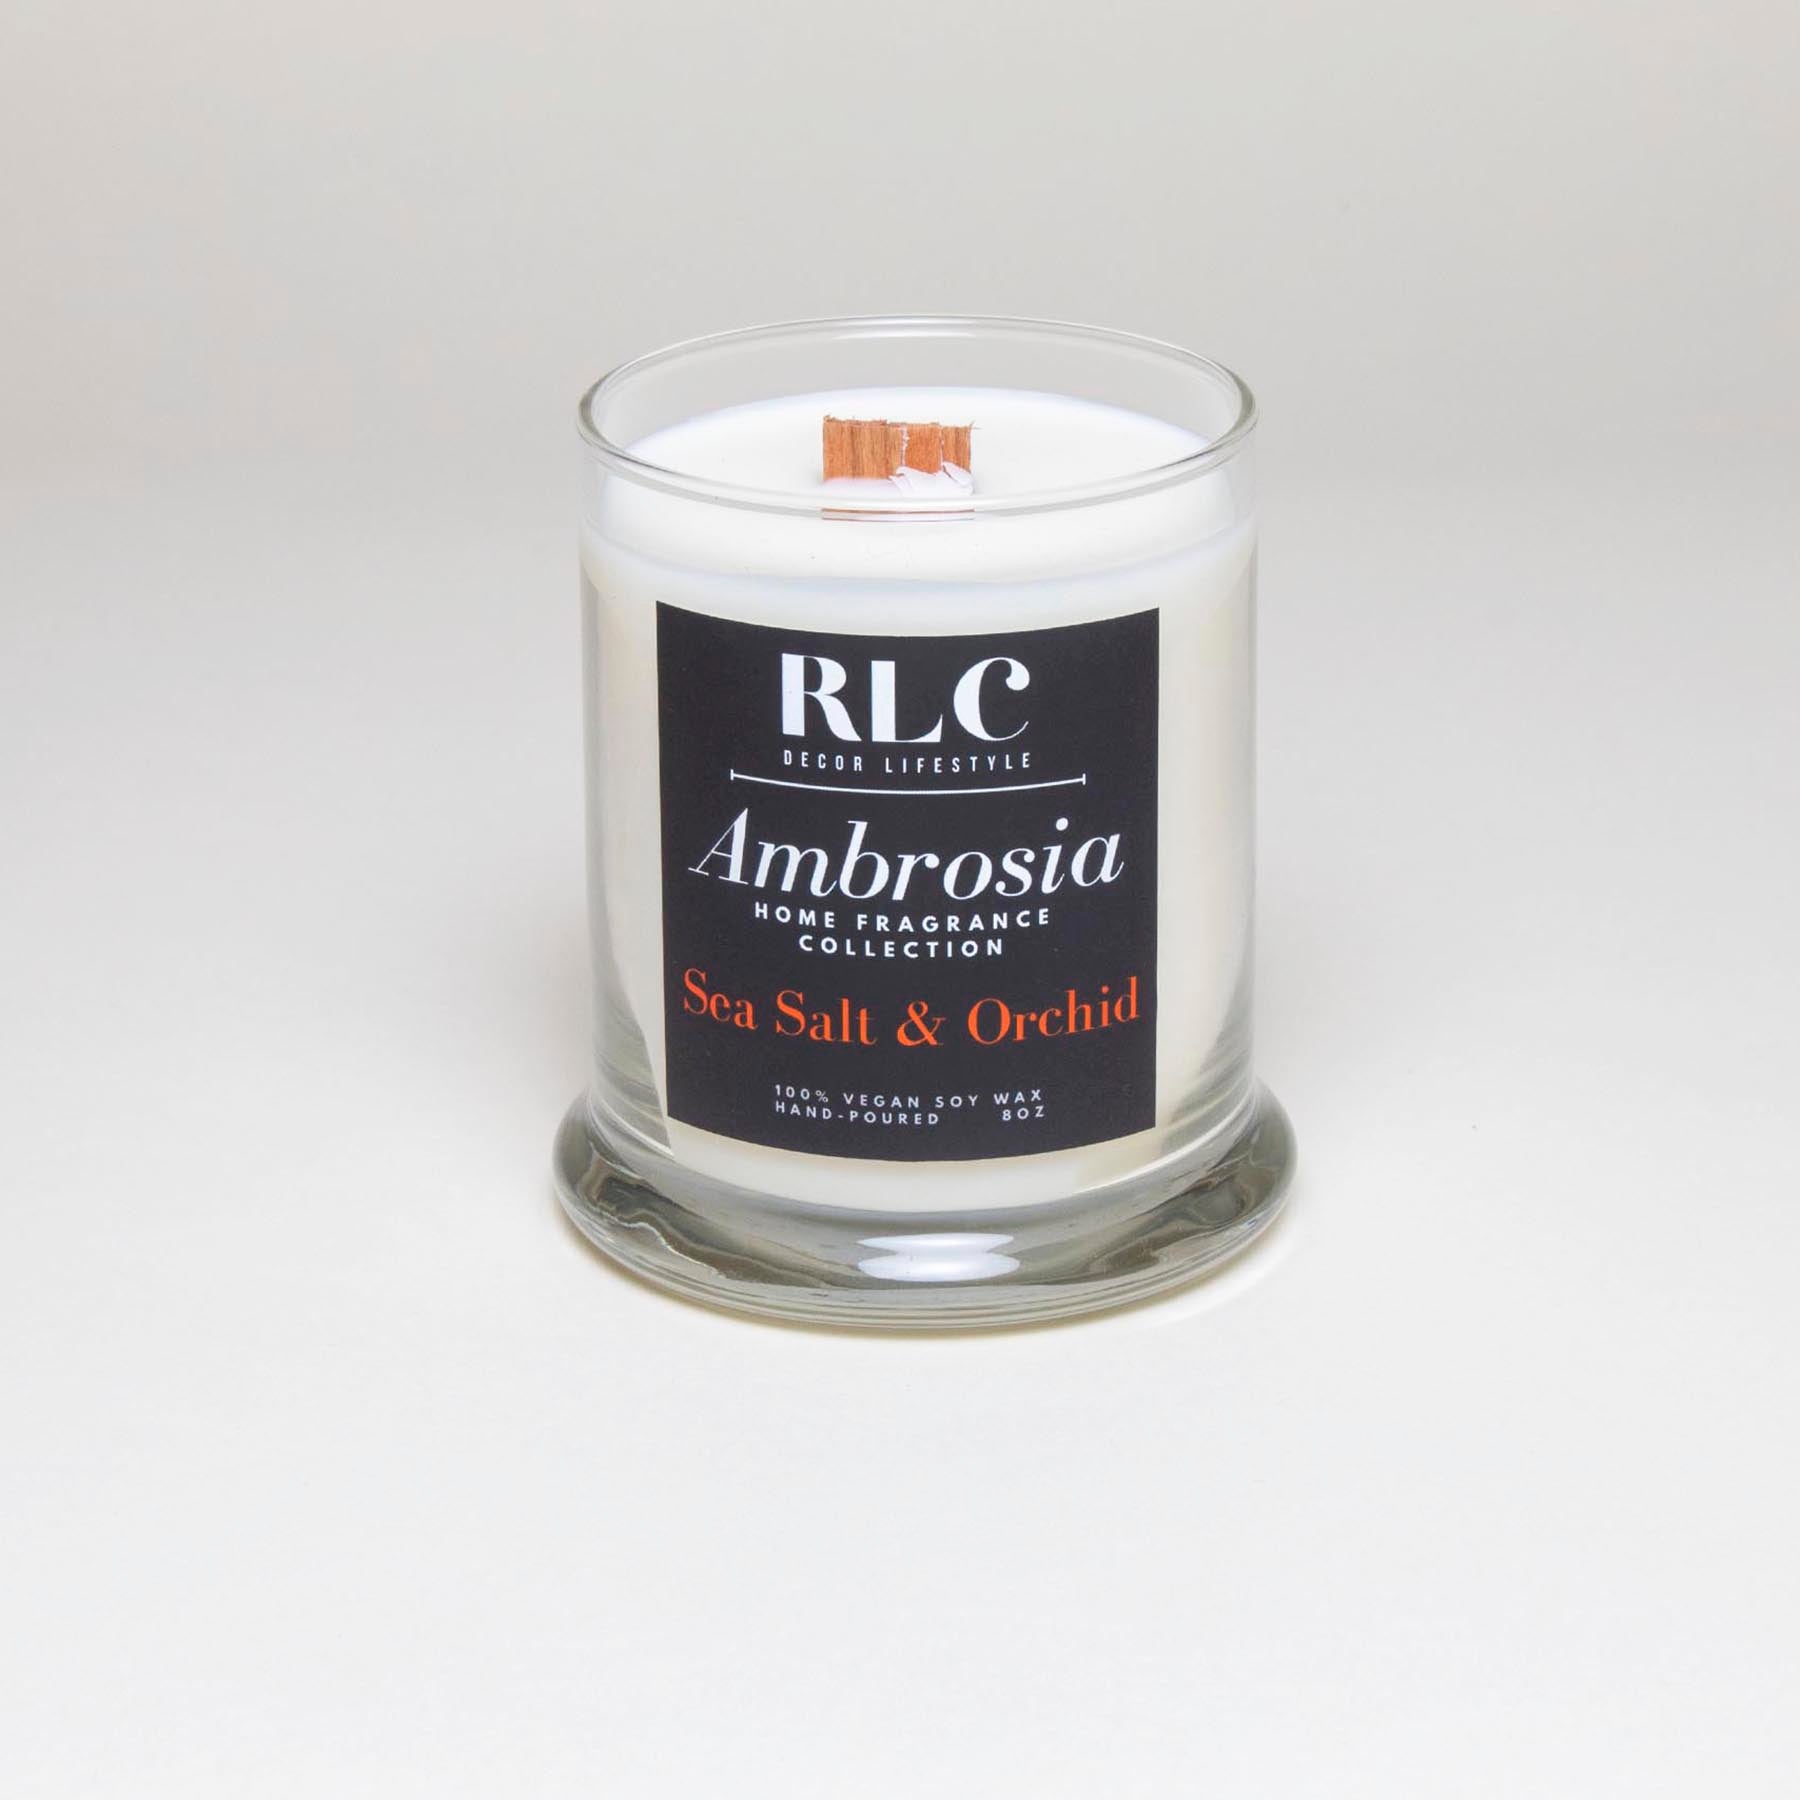 RLC Decor Lifestyle - Ambrosia Collection - Vegan Soy Sea Salt & Orchid Candle - A Chicago-based lifestyle brand. We provide 100% Handpoured Vegan Soy Candles for home & small office, travel candles, home decor, and jewelry. 